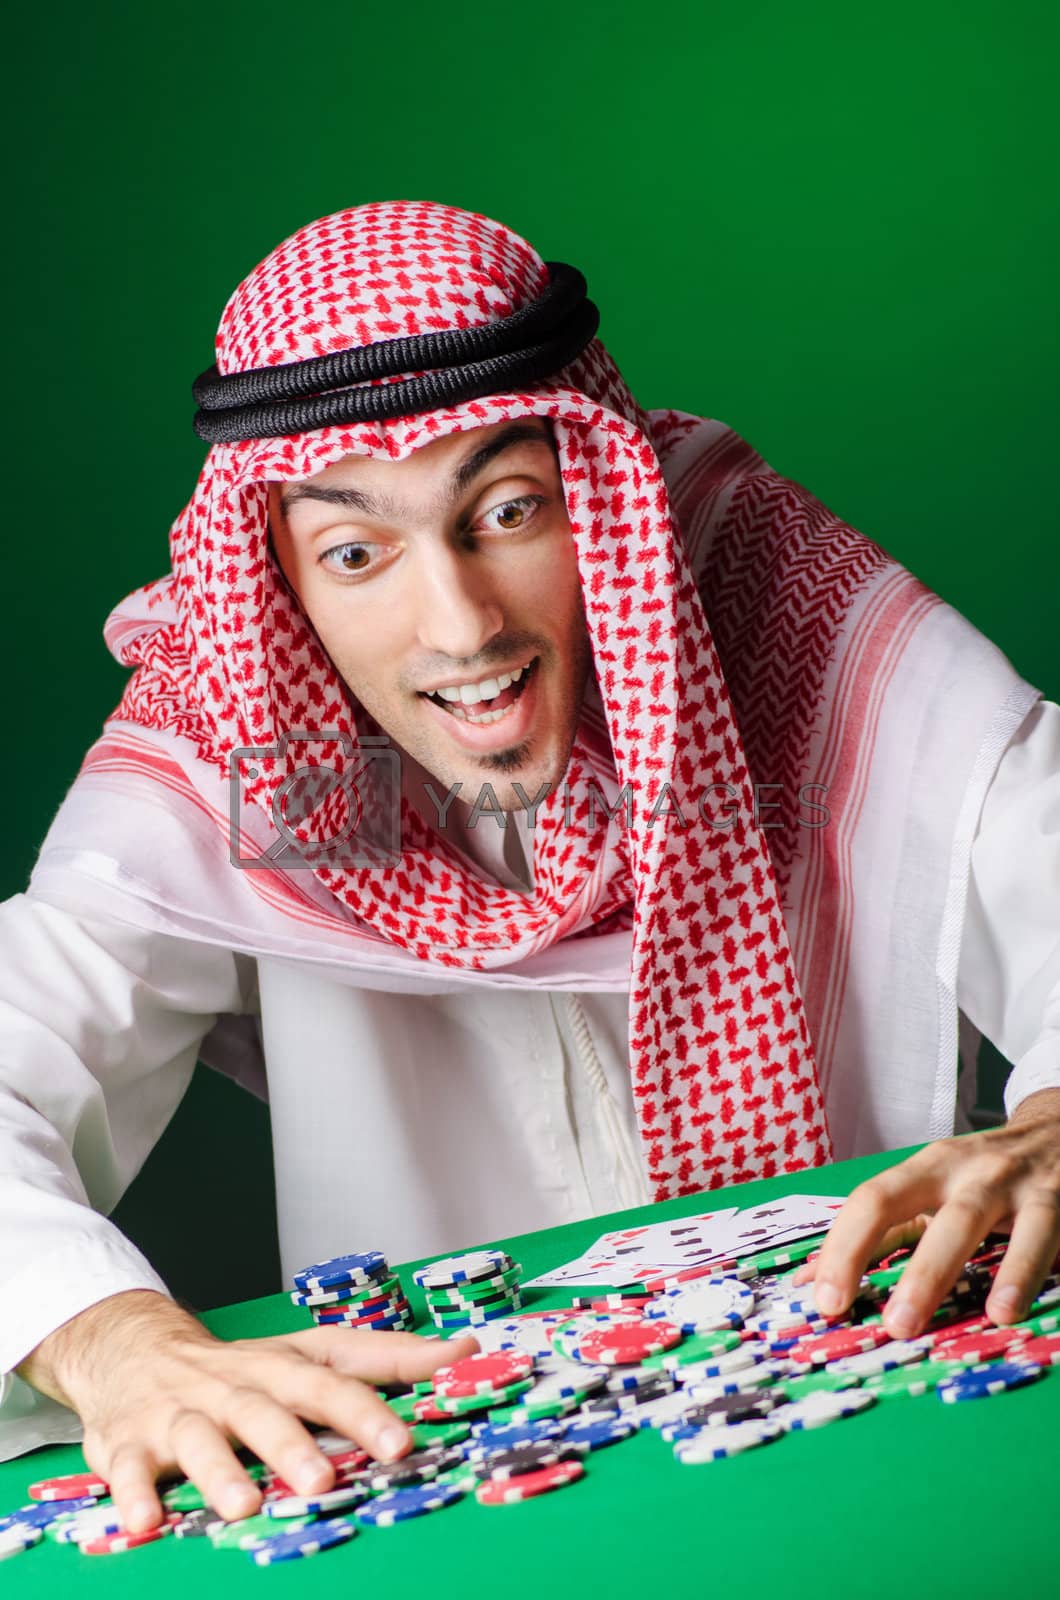 Royalty free image of Arab playing in casino - gambling concept with man by Elnur